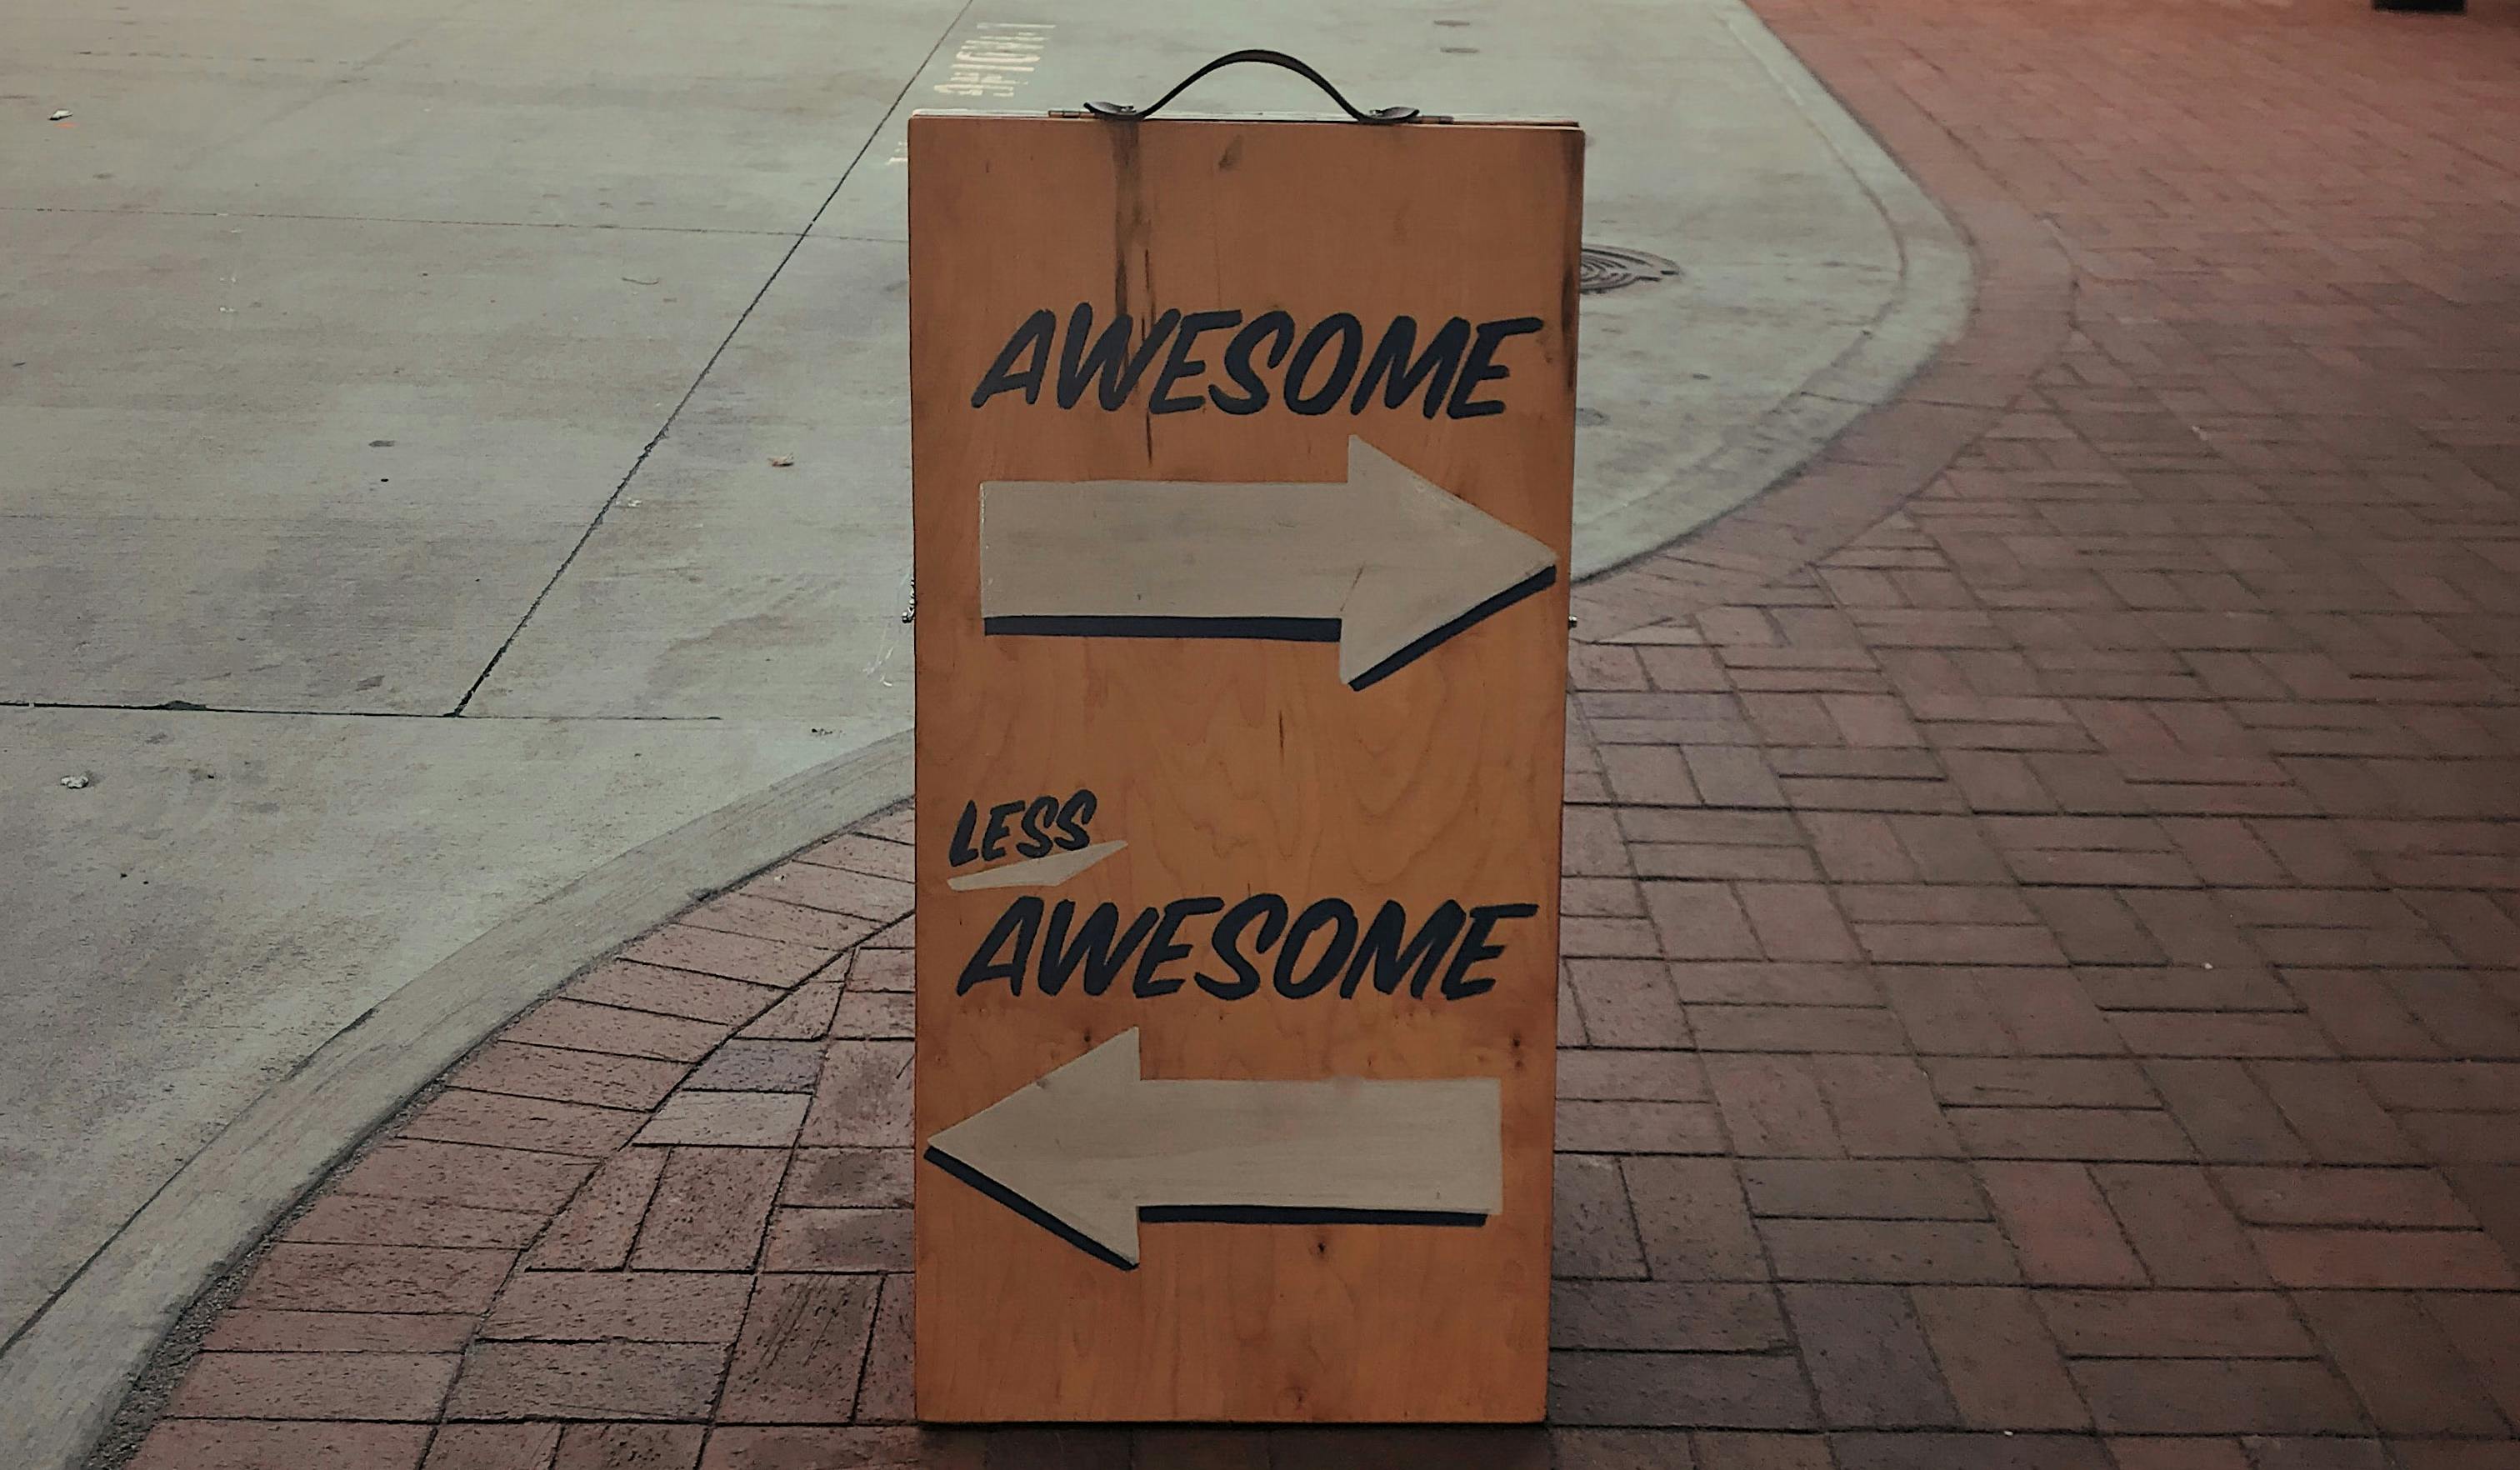 A sign saying "Awesome" with an arrow pointing right, and another arrow pointing left saying "Less Awesome".